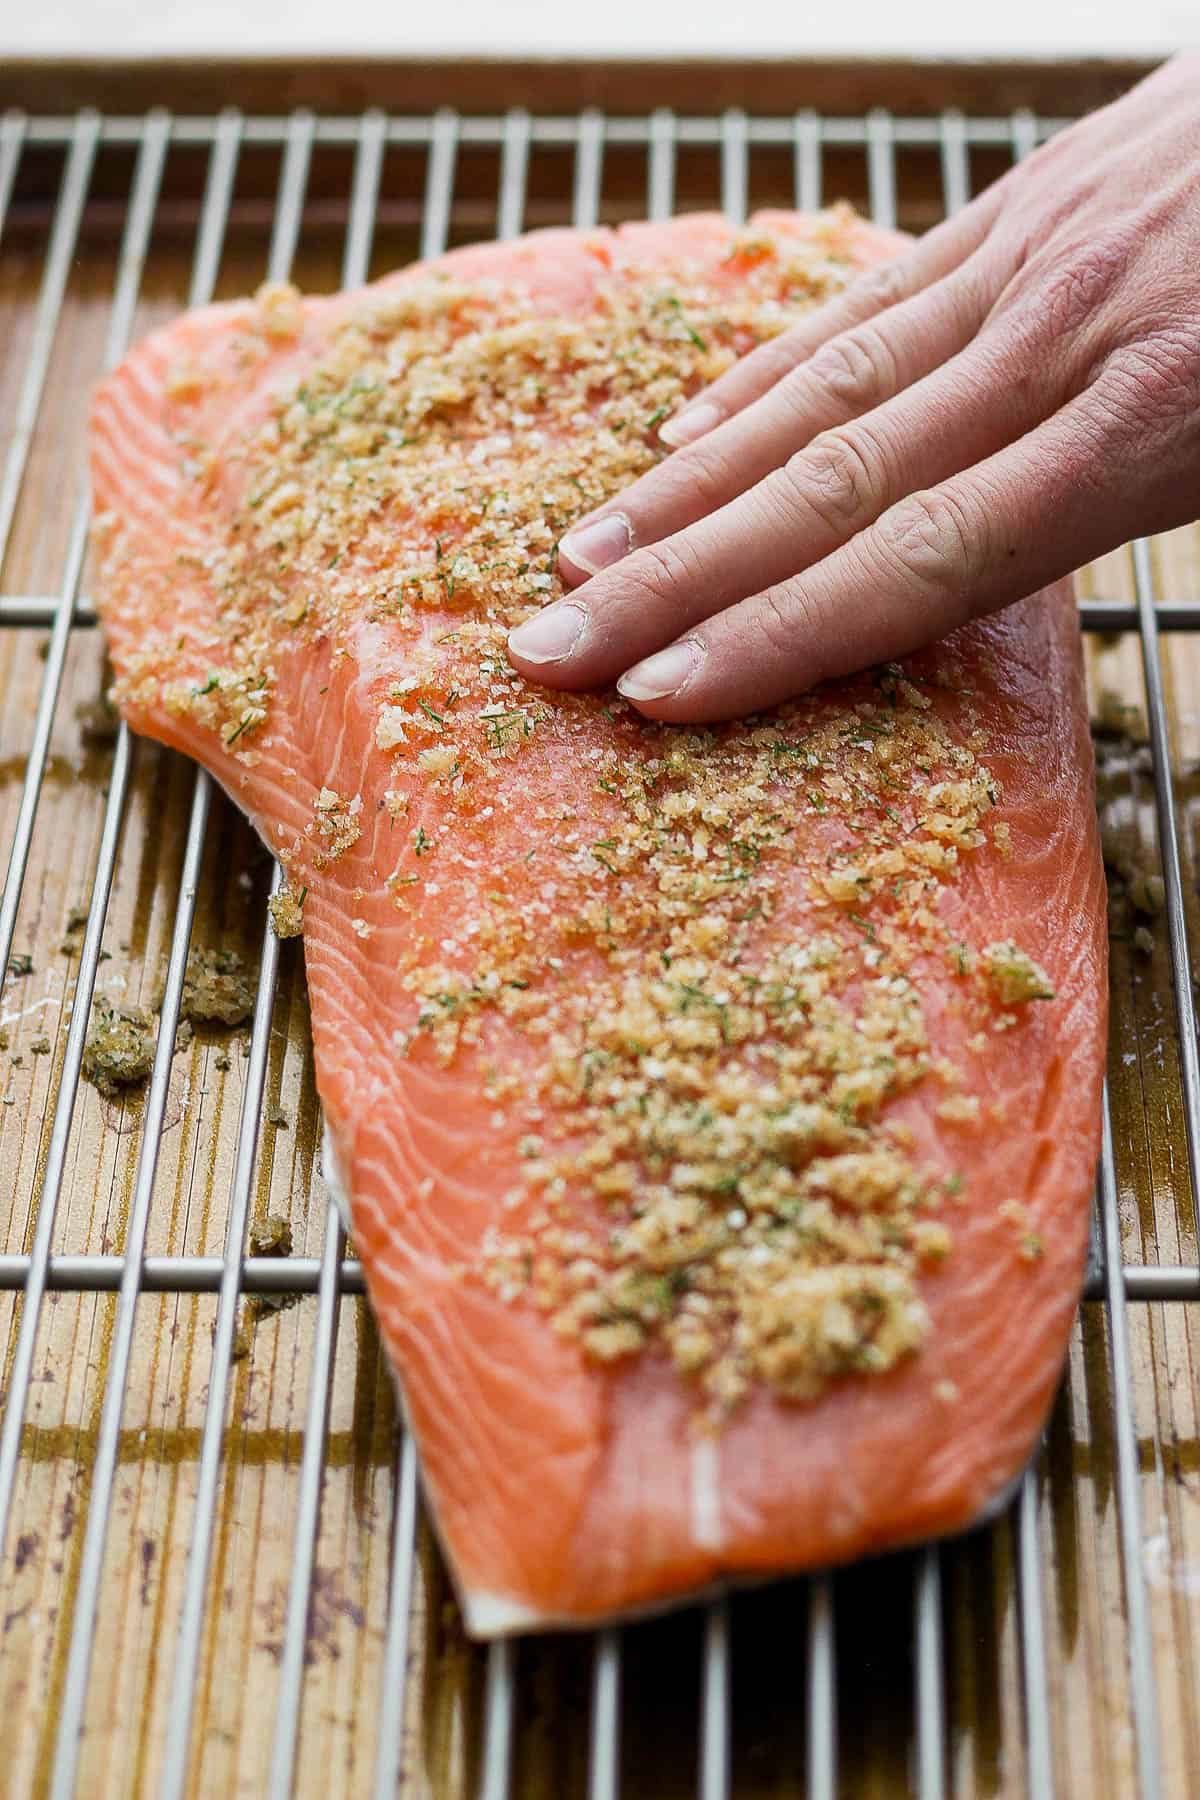 A hand rubbing the dry brine over the salmon flesh.